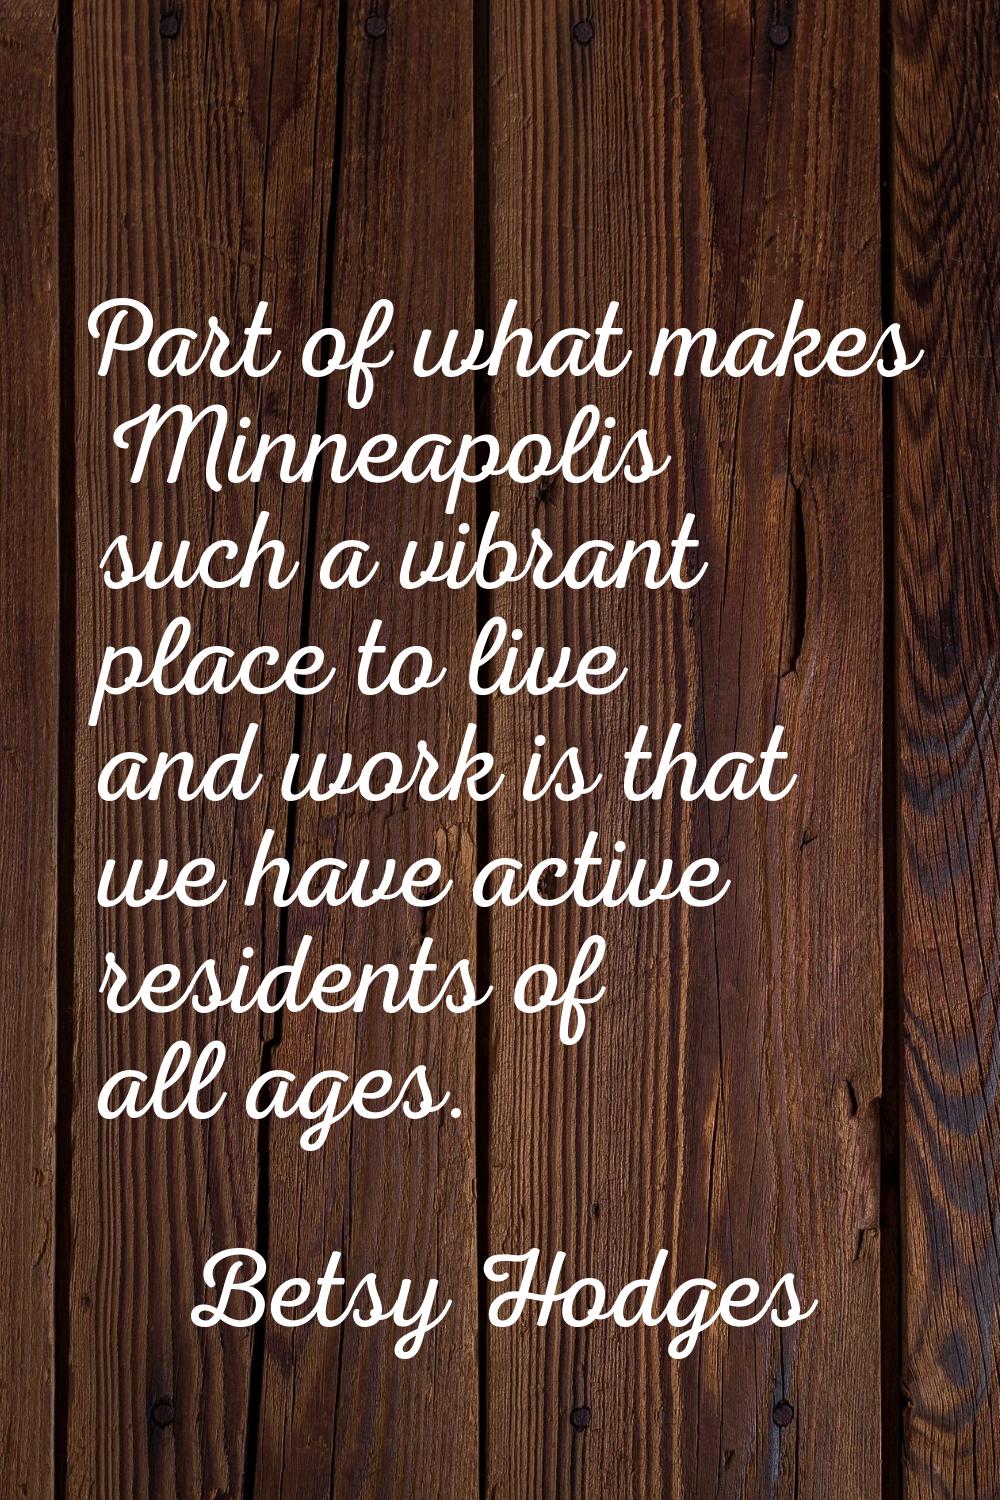 Part of what makes Minneapolis such a vibrant place to live and work is that we have active residen